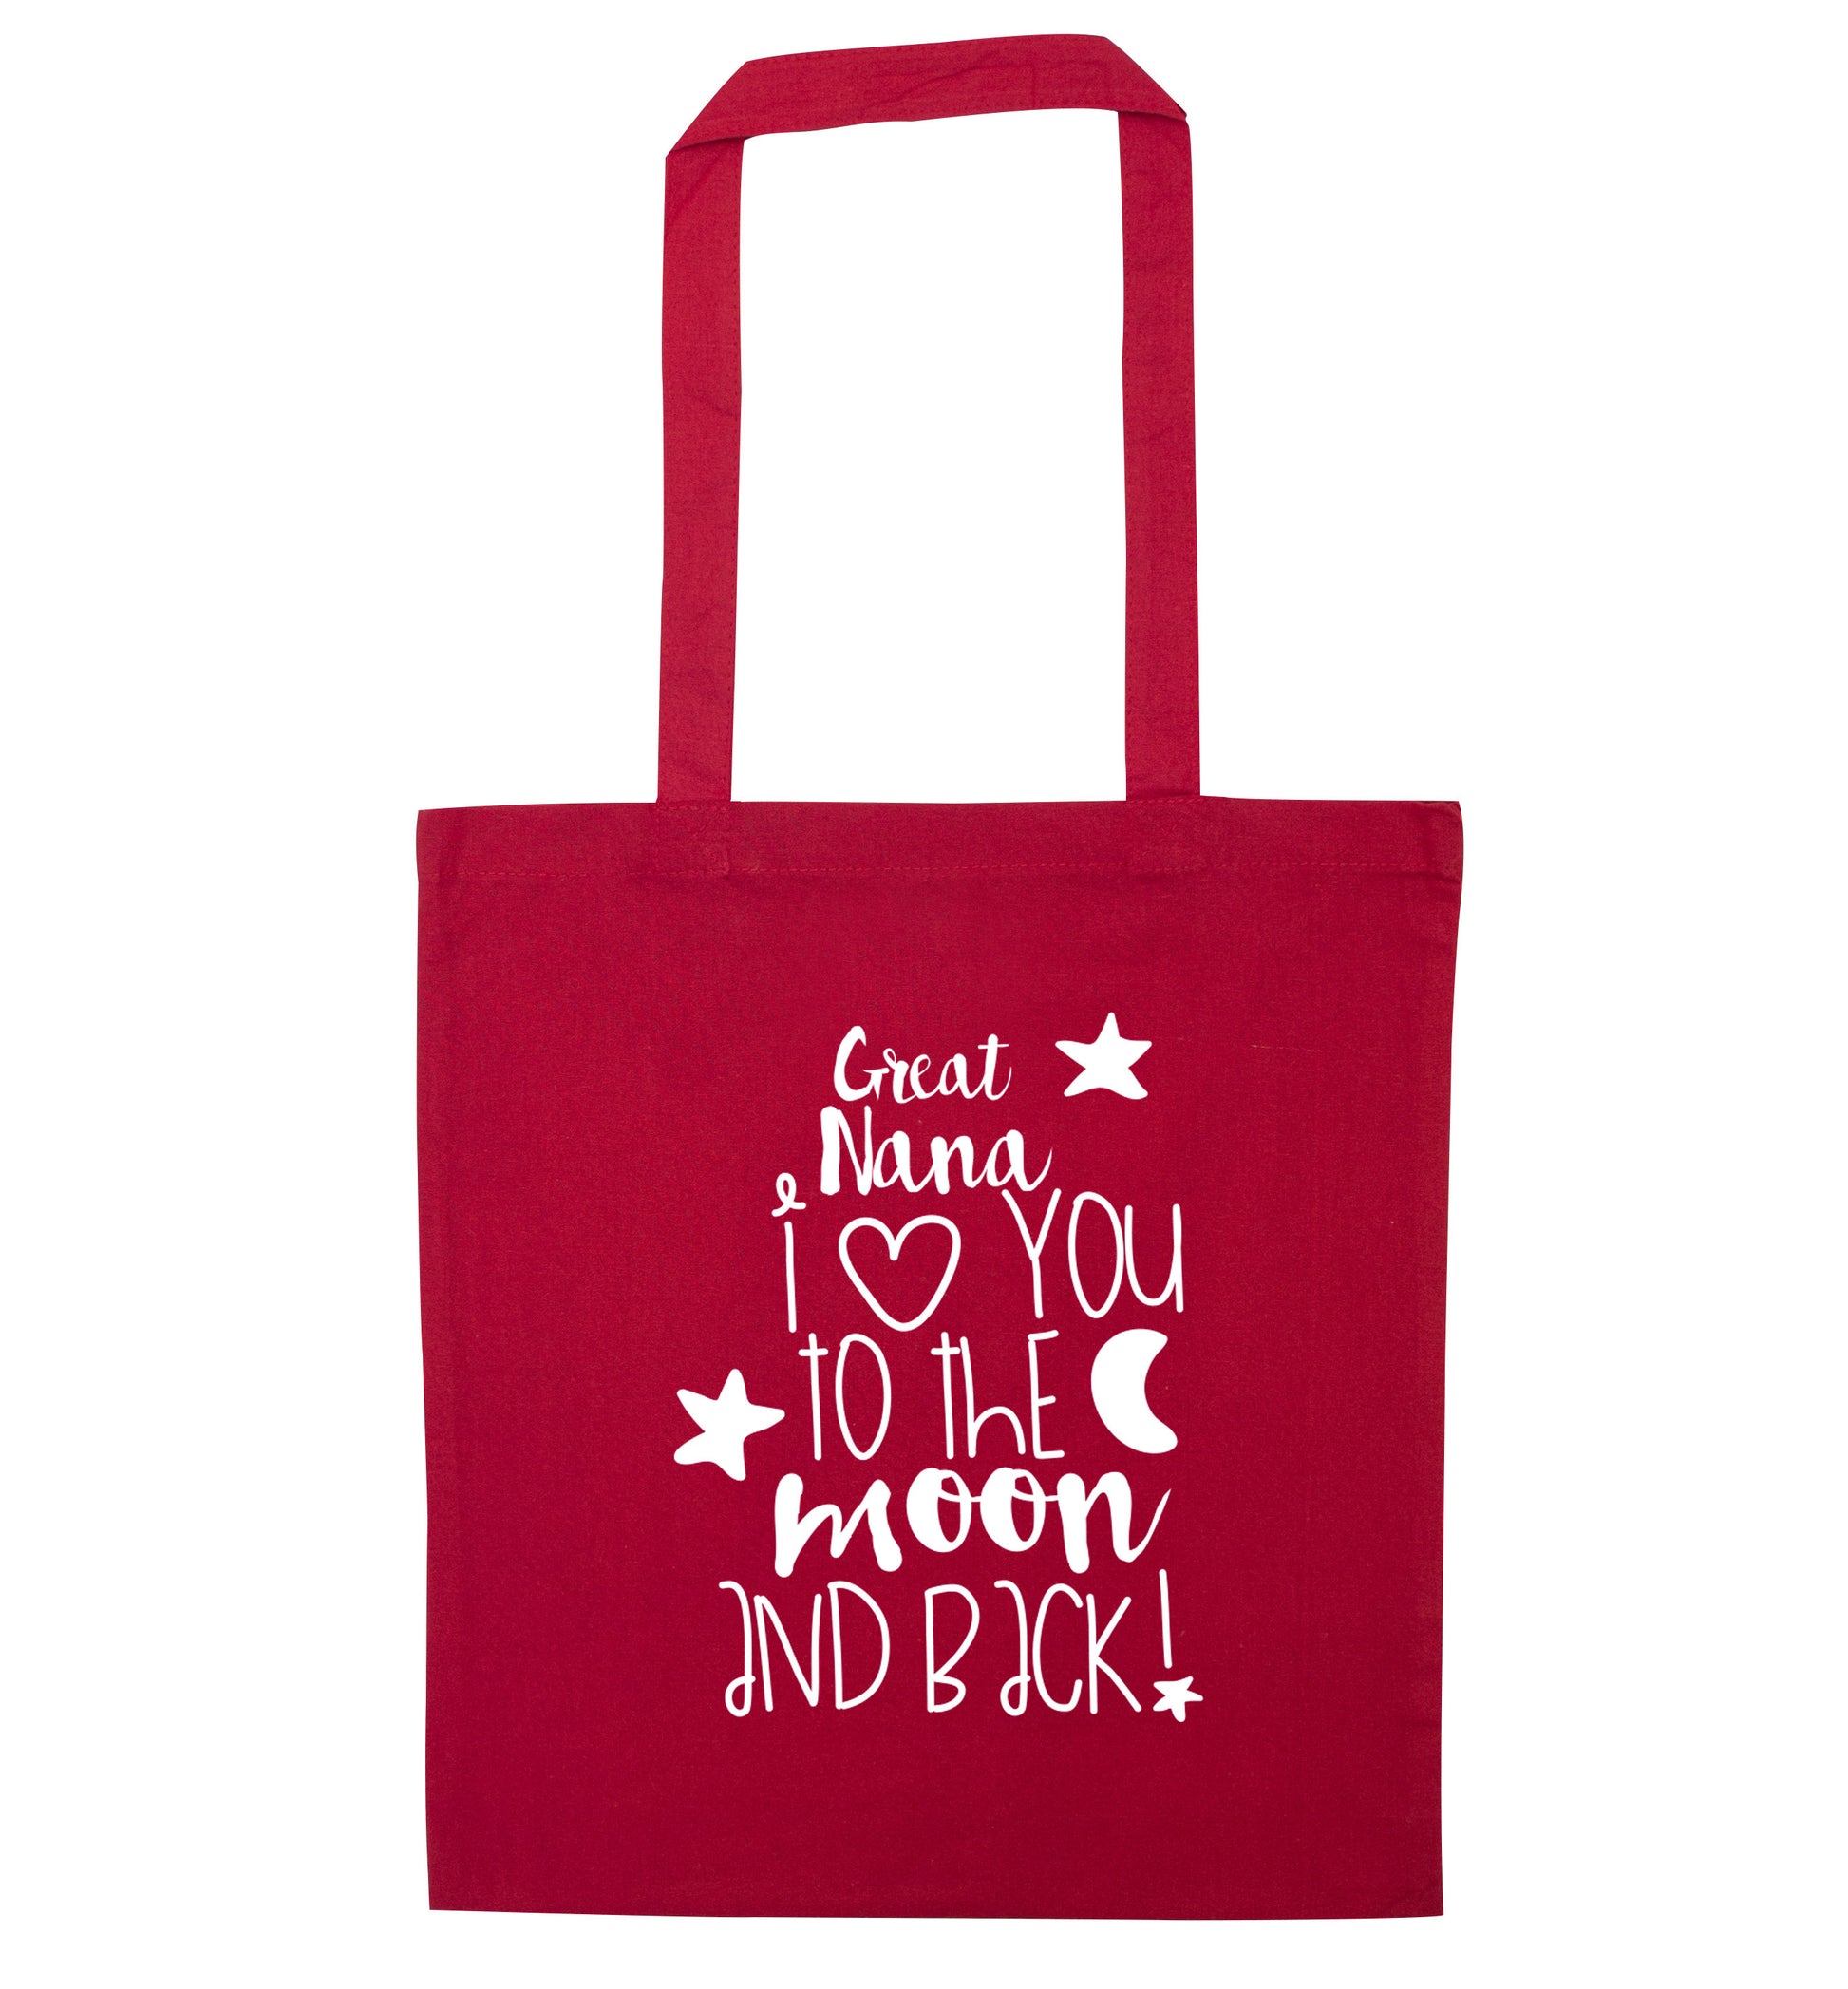 Great Nana I love you to the moon and back red tote bag